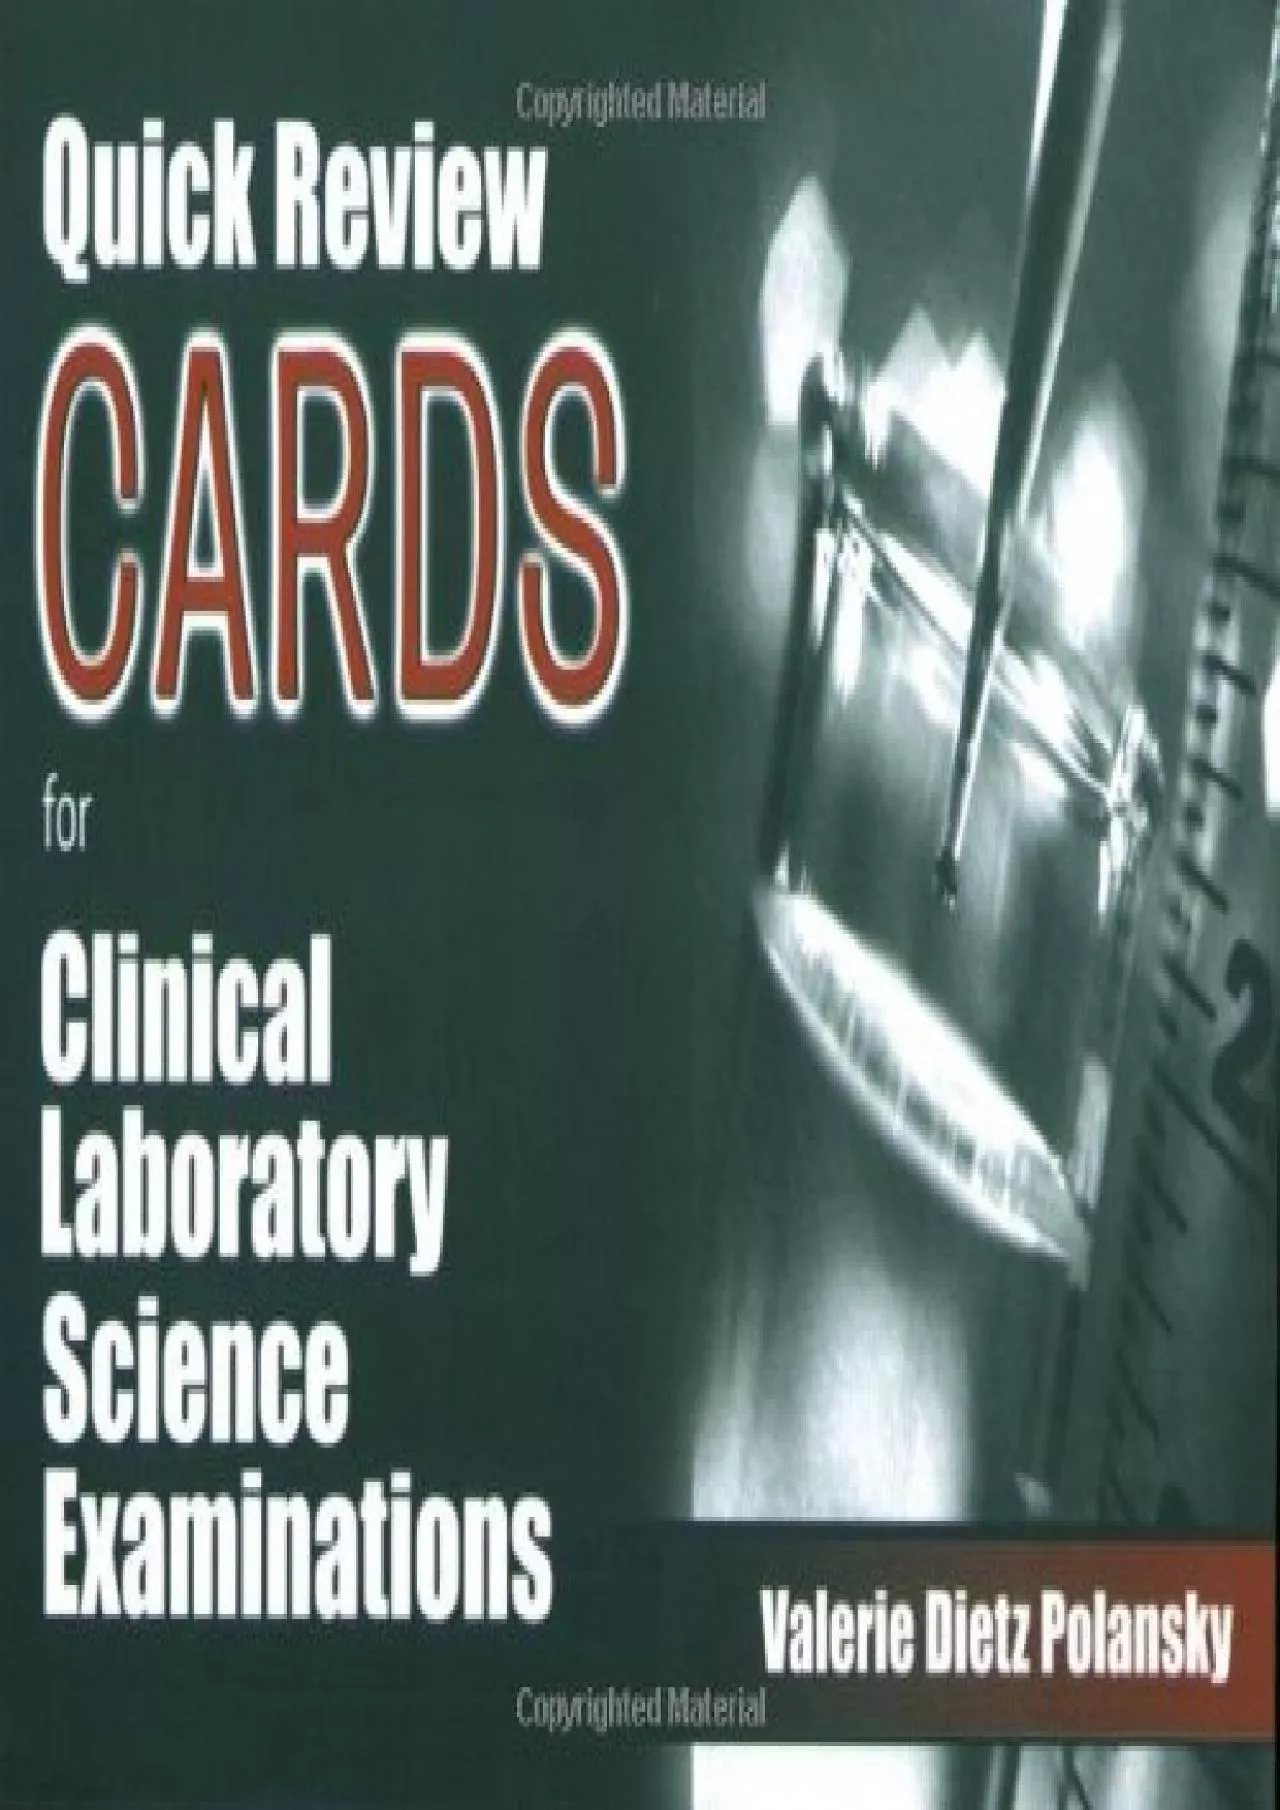 (EBOOK)-Quick Review Cards for Clinical Laboratory Science Examinations